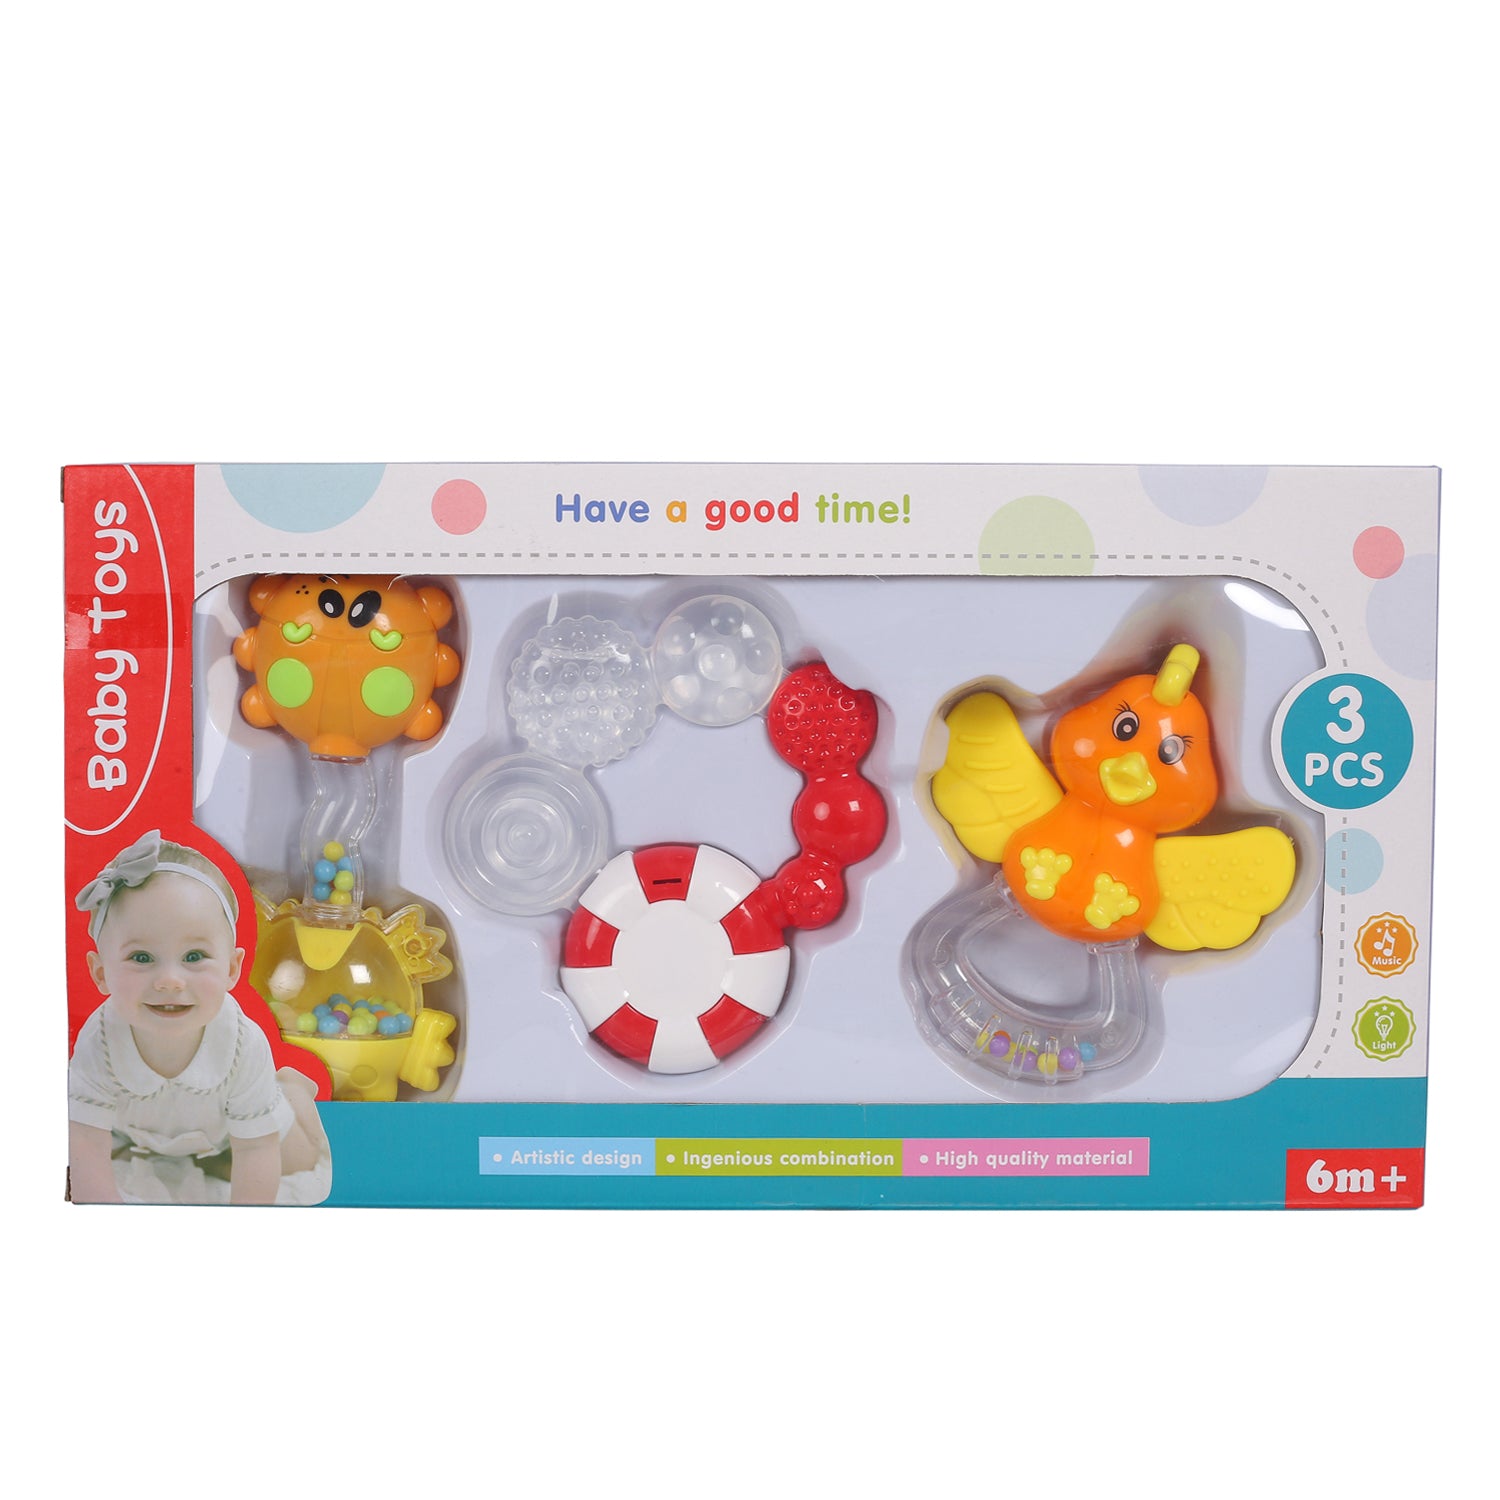 Fun-filled Multicolour Set of 3 Musical Rattle Teether - Baby Moo